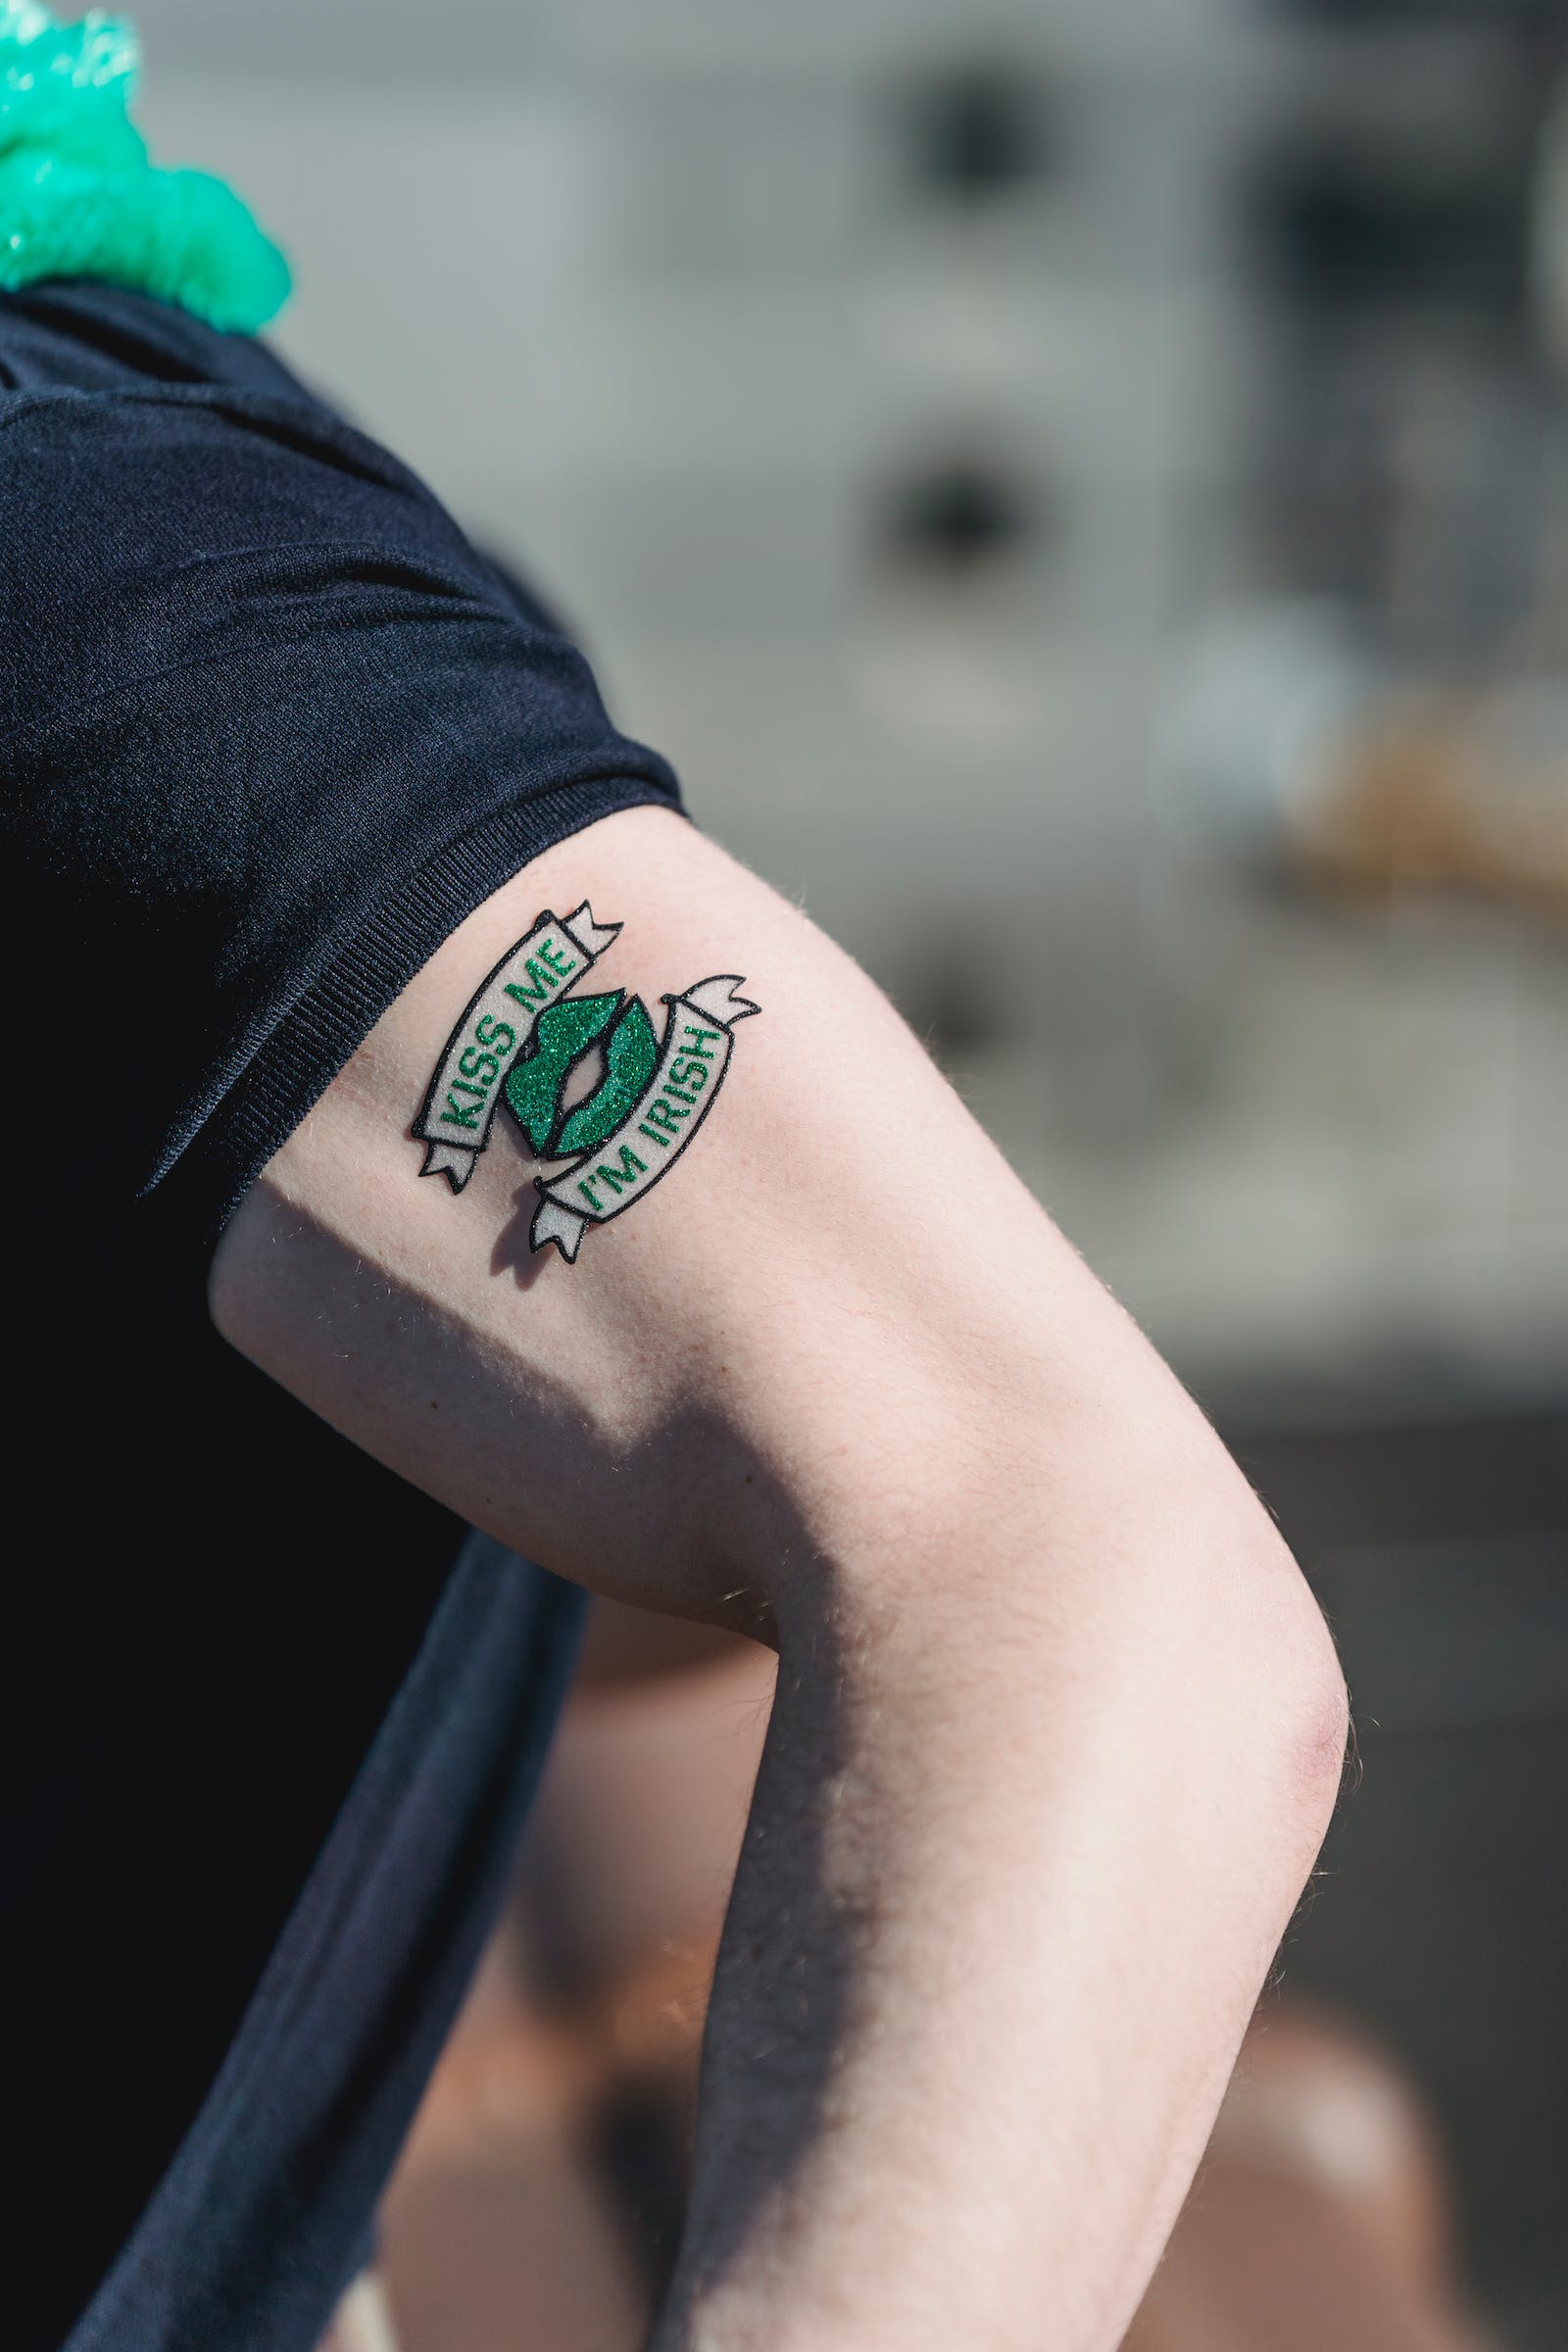 Temporary Tattoos Manufacturer: How to Choose the Right Supplier?